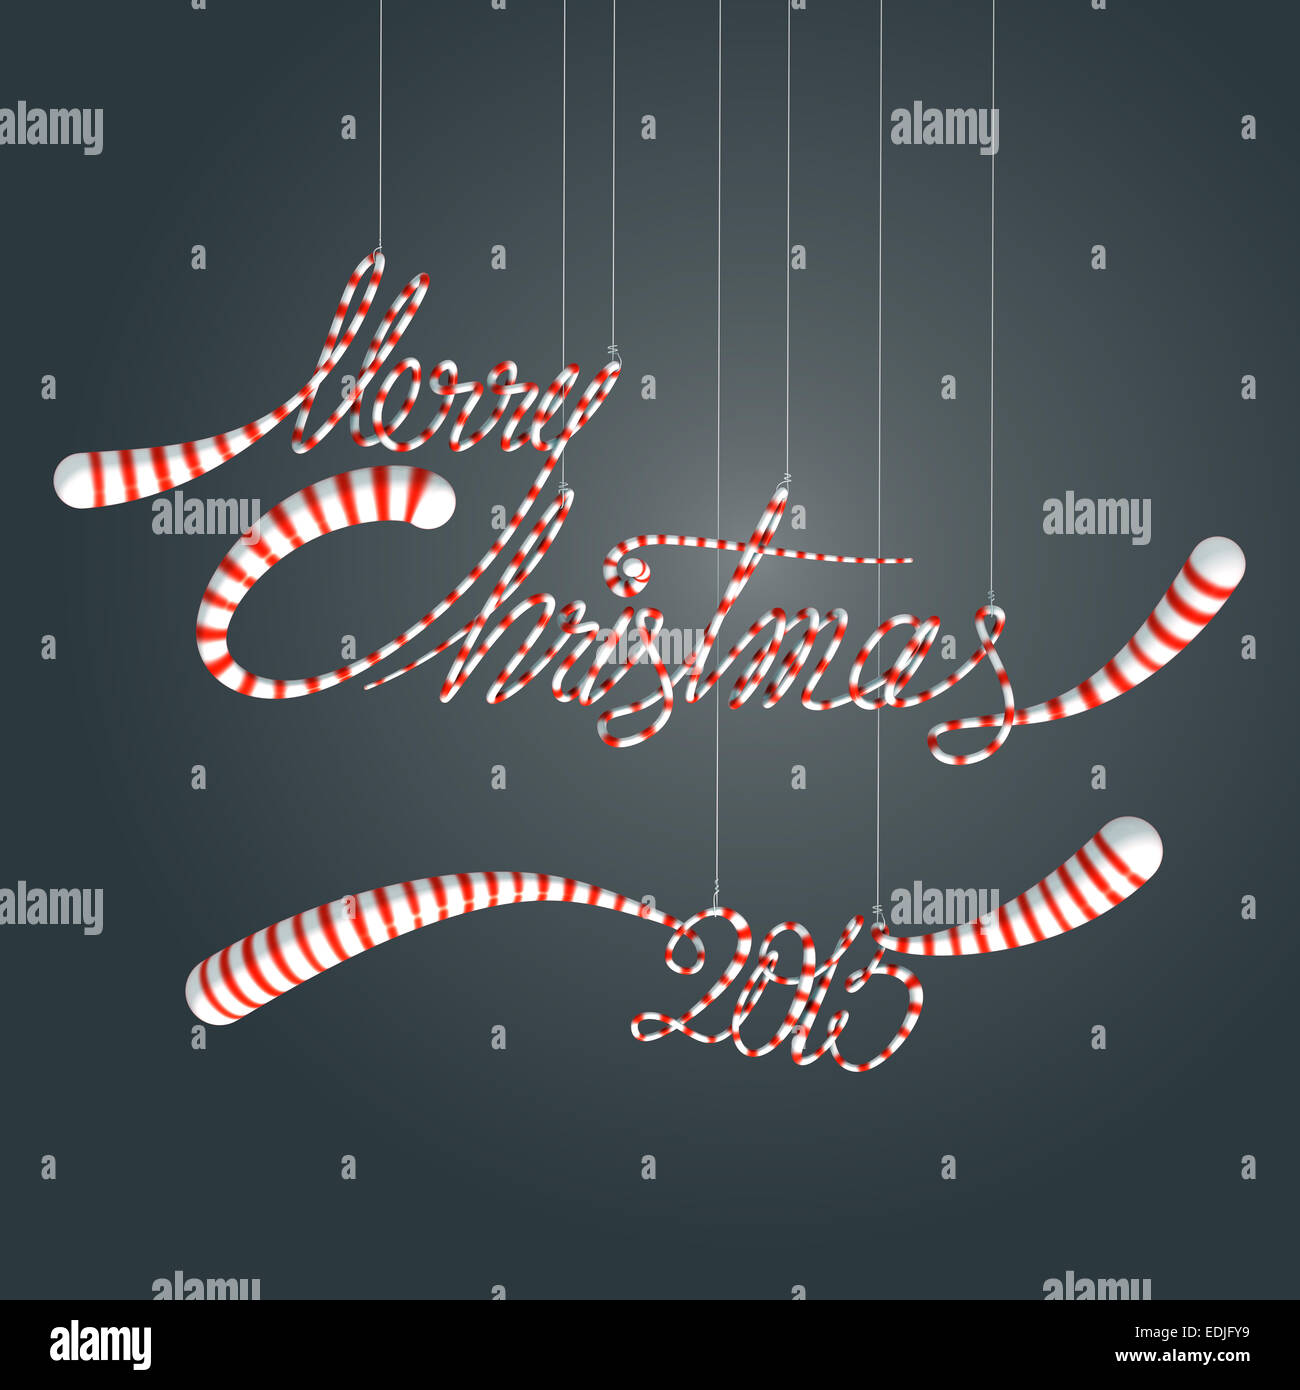 Merry Christmas 2015 Stripes Candy Quotes Hanging On Wires In Front Of Gray Gradient Background 3d Render Isolated Template Stock Photo Alamy